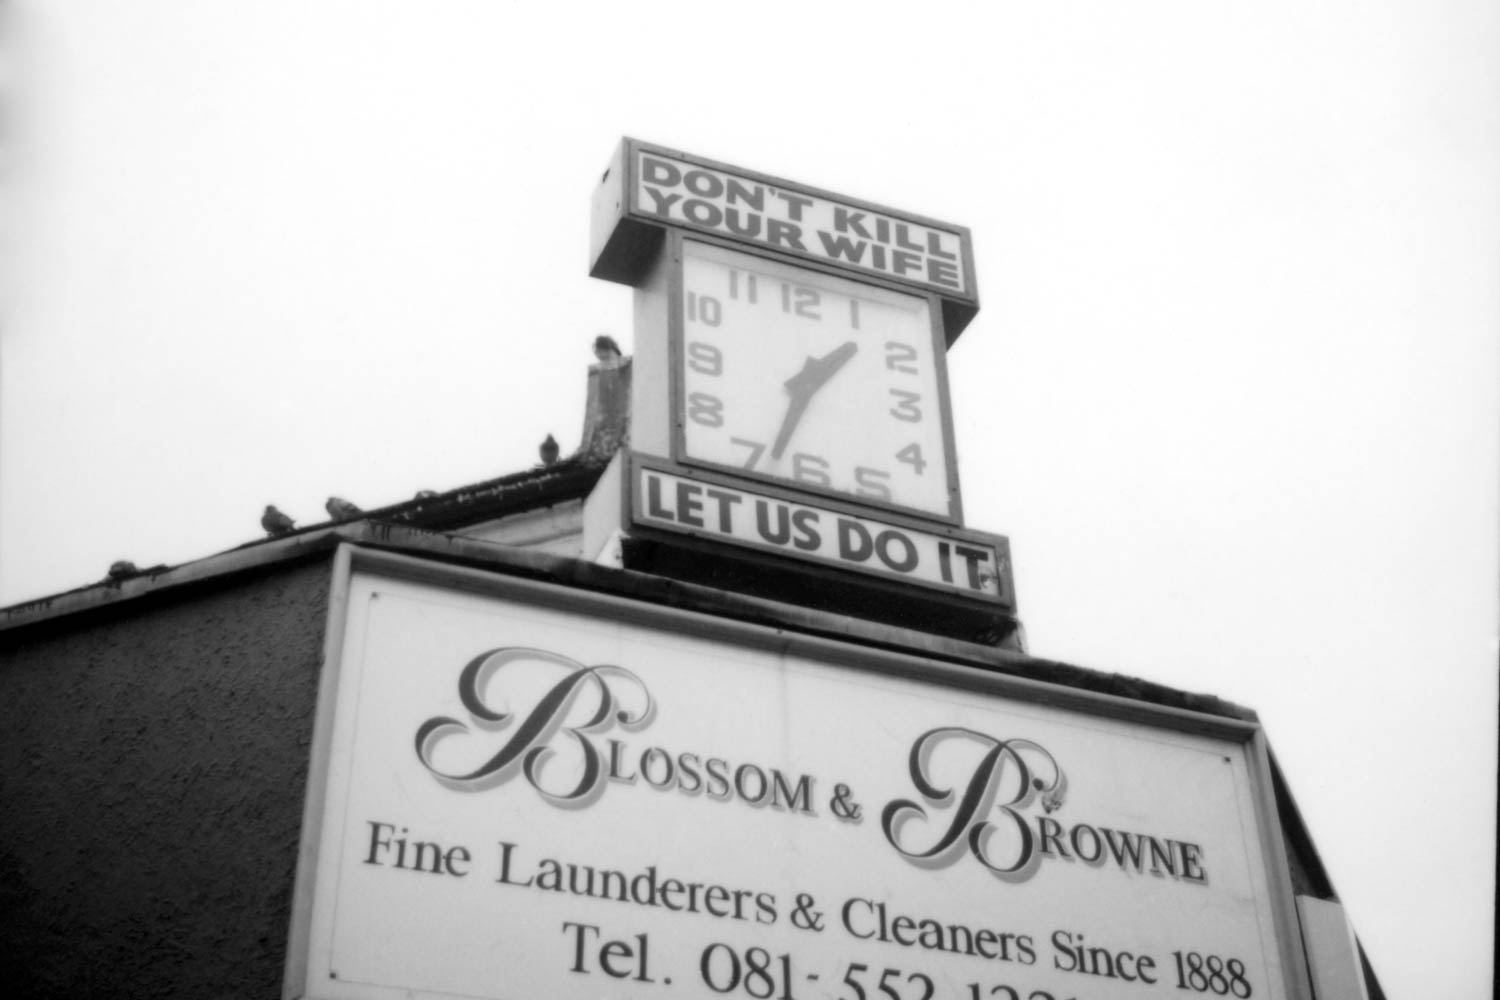 blossom-browne-laundry-sign.jpg